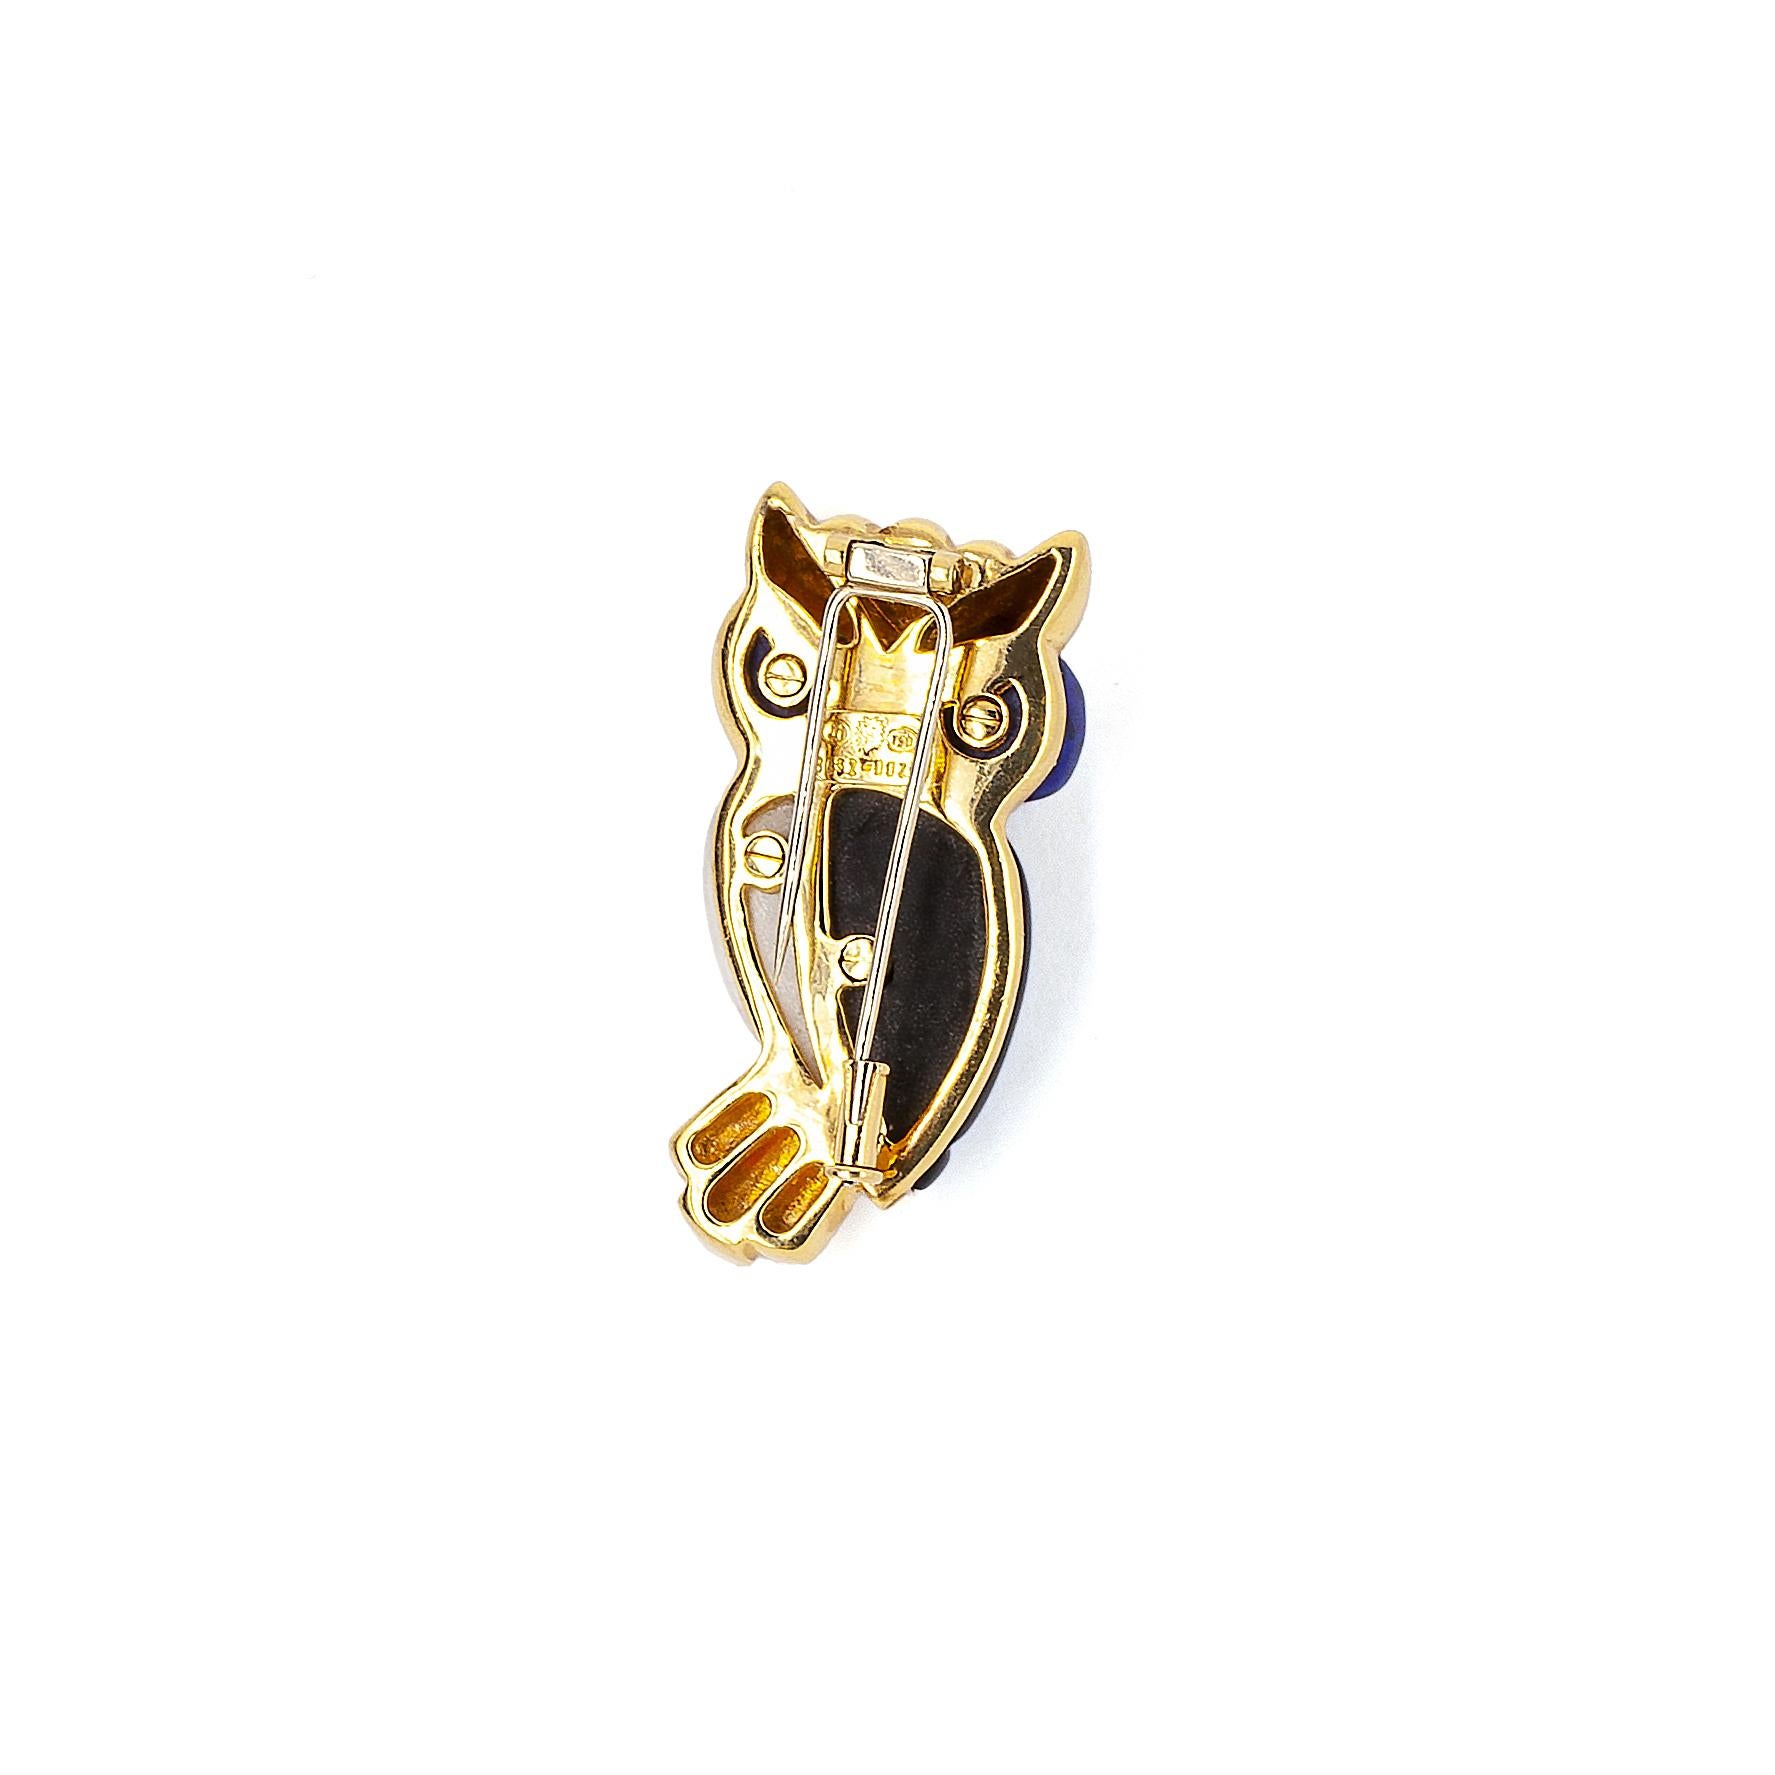 Add a touch of playfulness to your jewellery collection with this adorable 18 carat yellow gold owl clip brooch.

Wonderful scintillations come from the eyes of the owl which are created using 2 rubover set fine quality round brilliant cut diamonds,